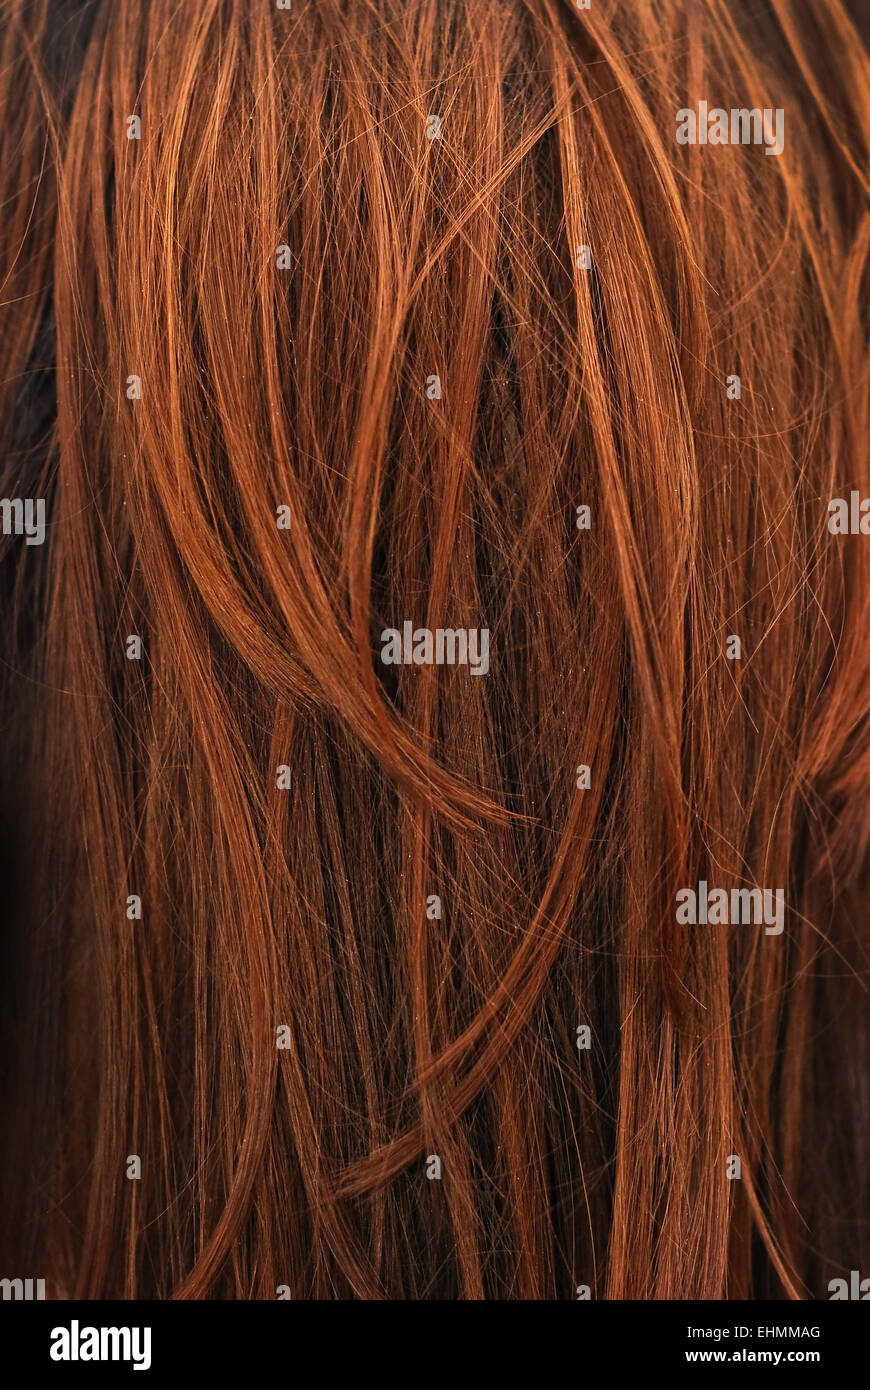 long brown hair background texture Stock Photo